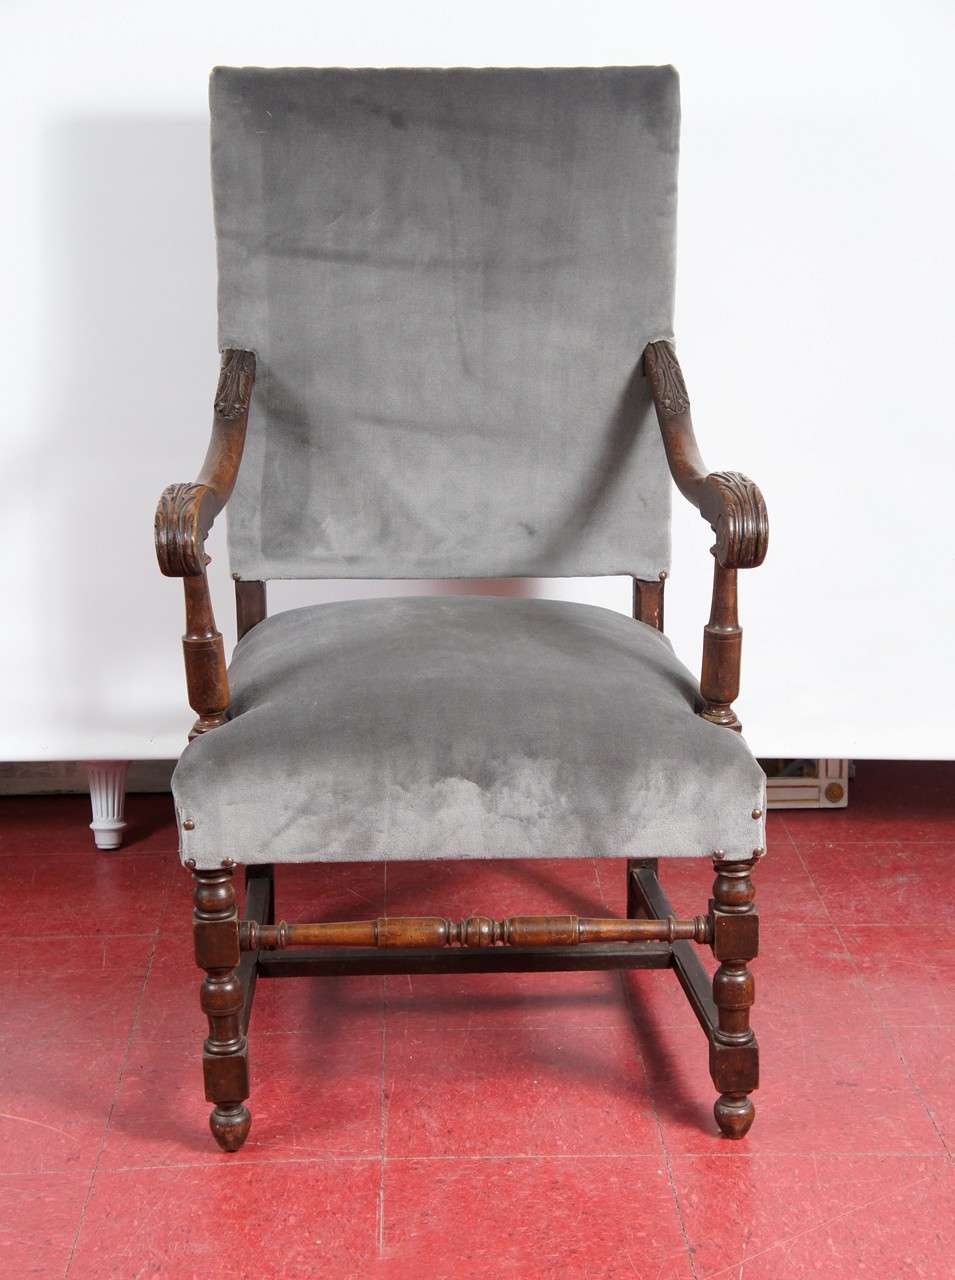 This French 17th century-style throne chair has solid oak framing and grey mohair upholstery and nailheads. The arms are hand-carved leaves and the legs are turned. Something for the head of the table or beside the fireplace? Comfort without taking